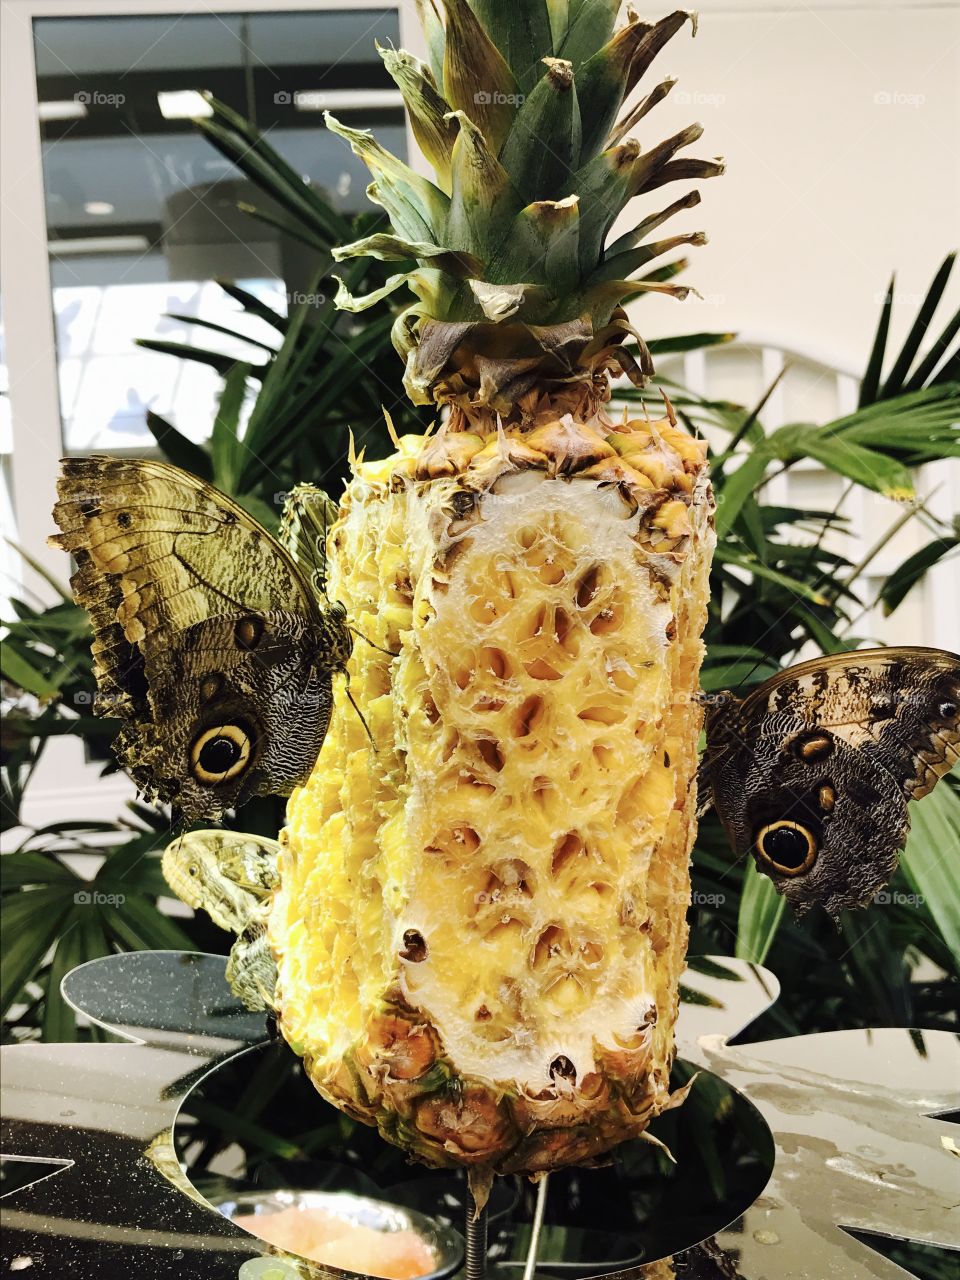 Pineapple and butterflies 